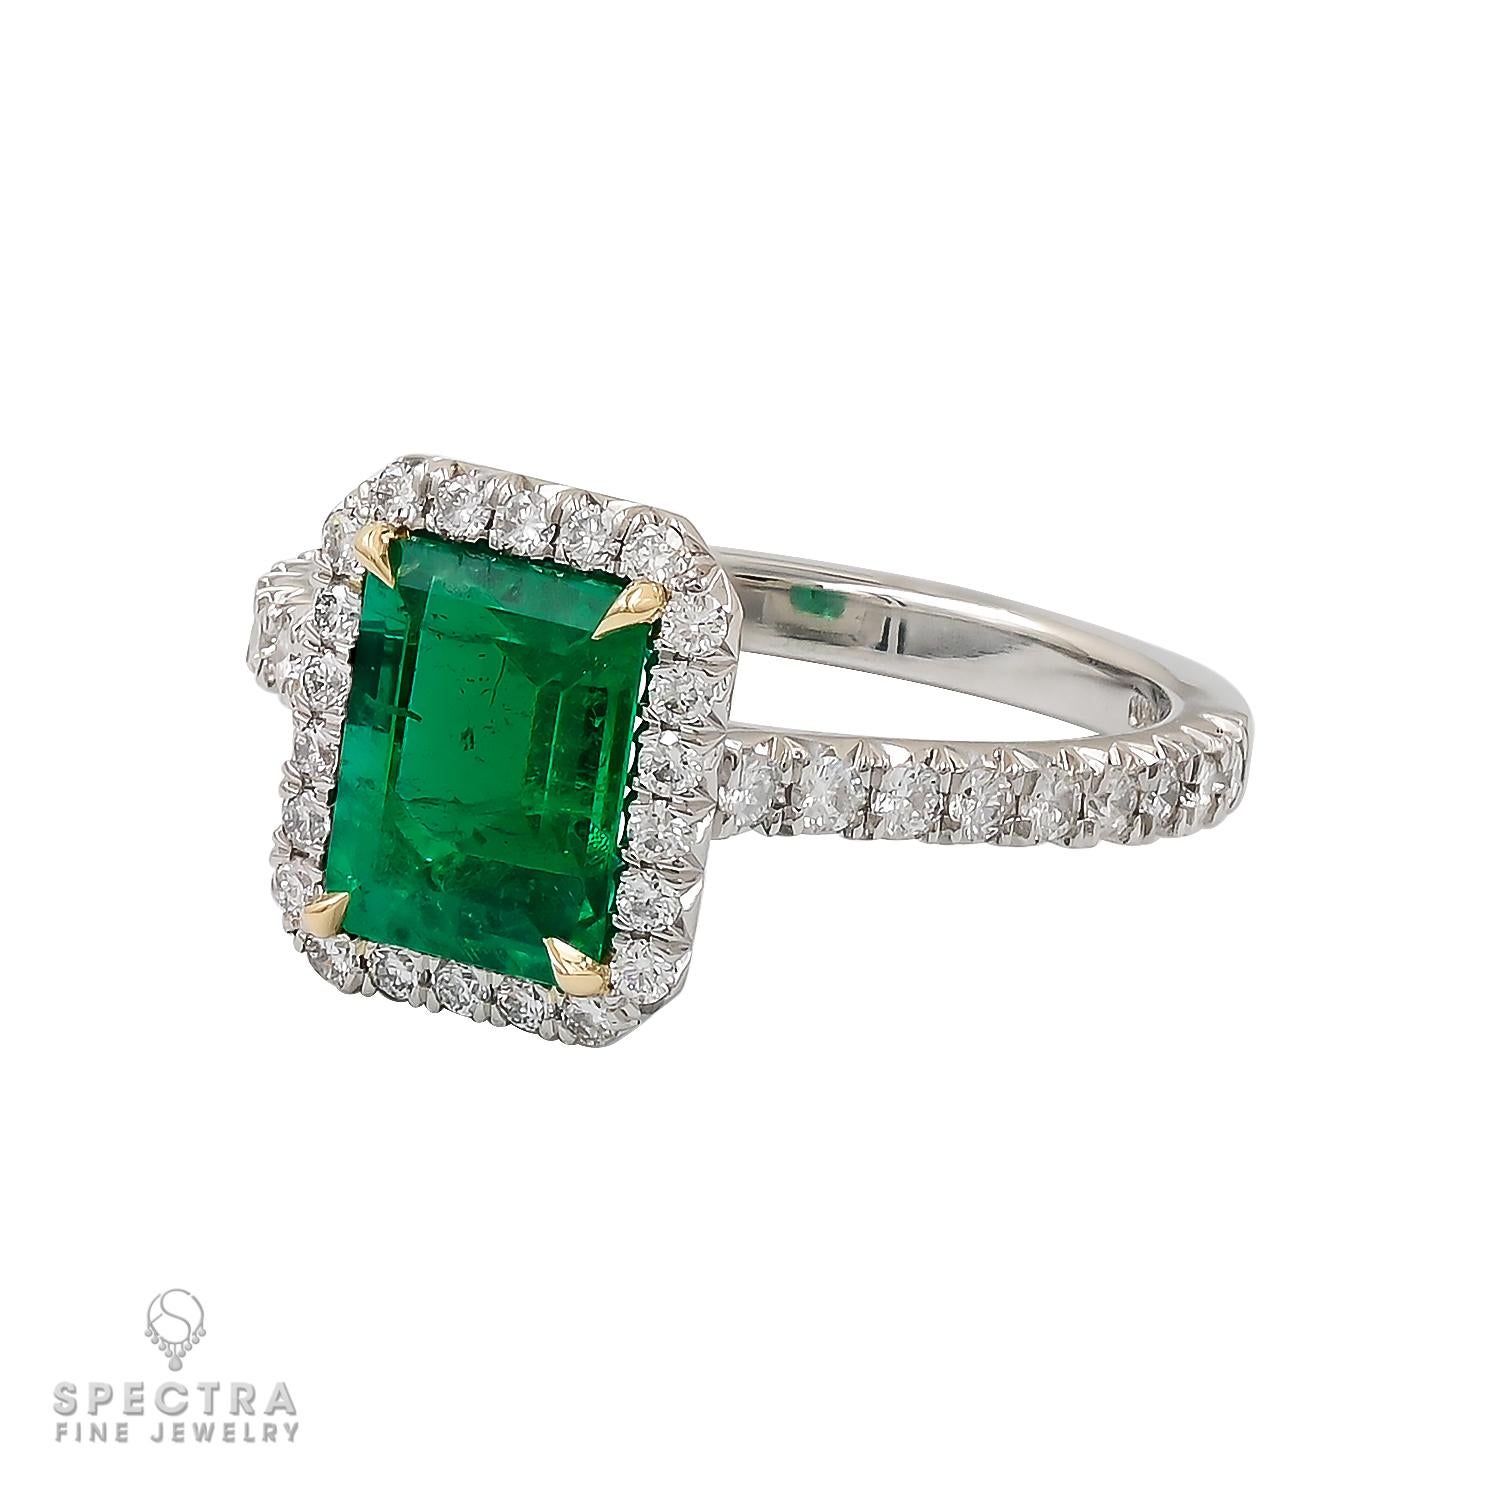 The centerpiece of this lovely creation is the 1.47ct emerald-cut Colombian emerald, a gem of unparalleled allure. Accompanied by a GRS certificate, this precious jewel assures not only beauty but authenticity of the highest order. A harmonious